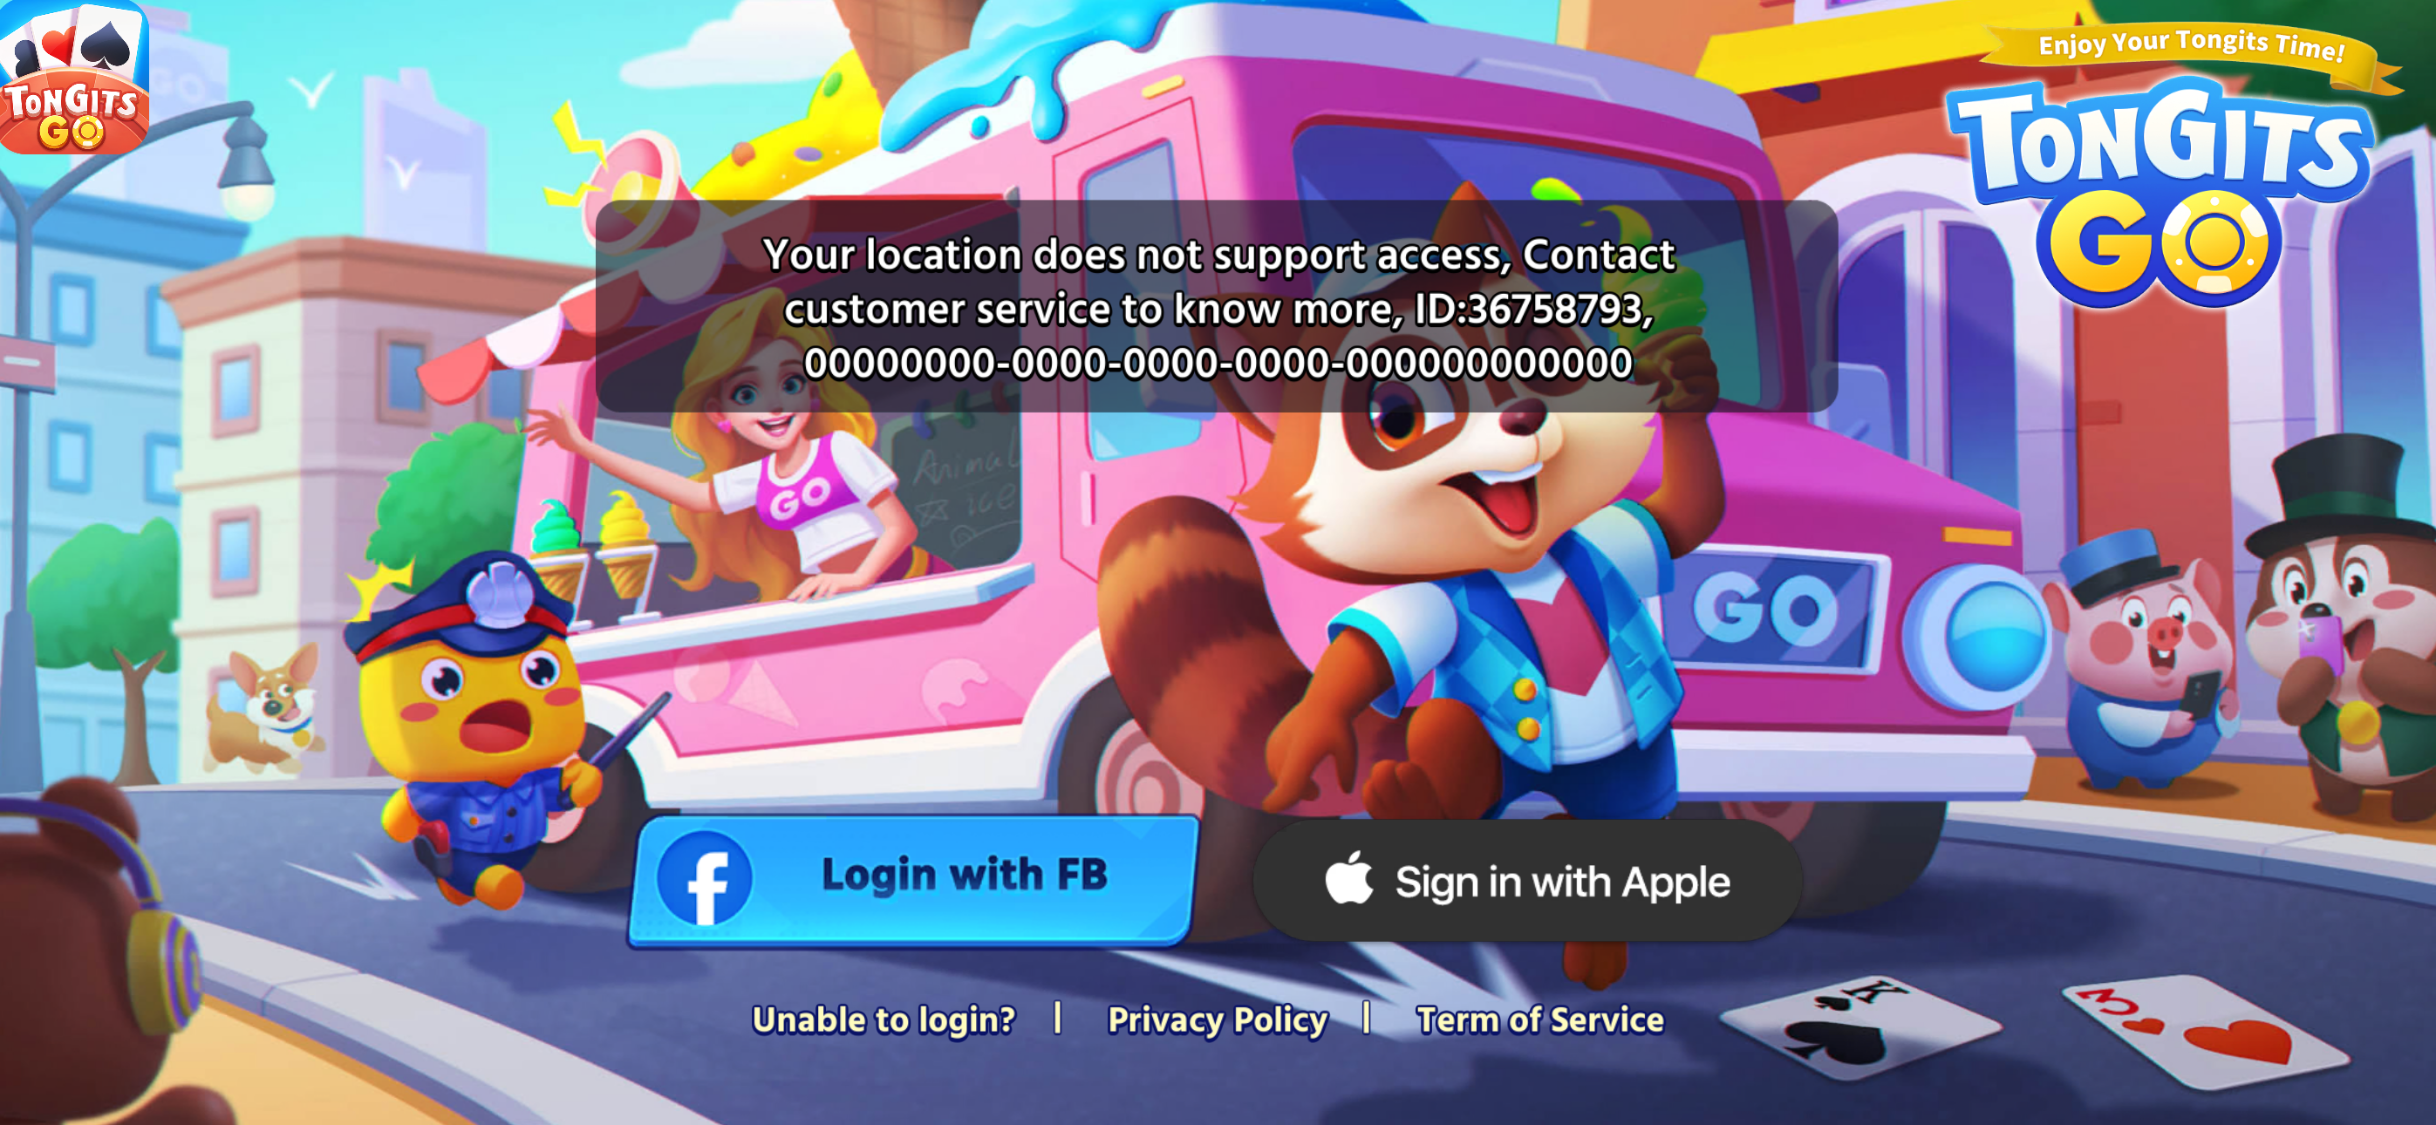 Location not supported